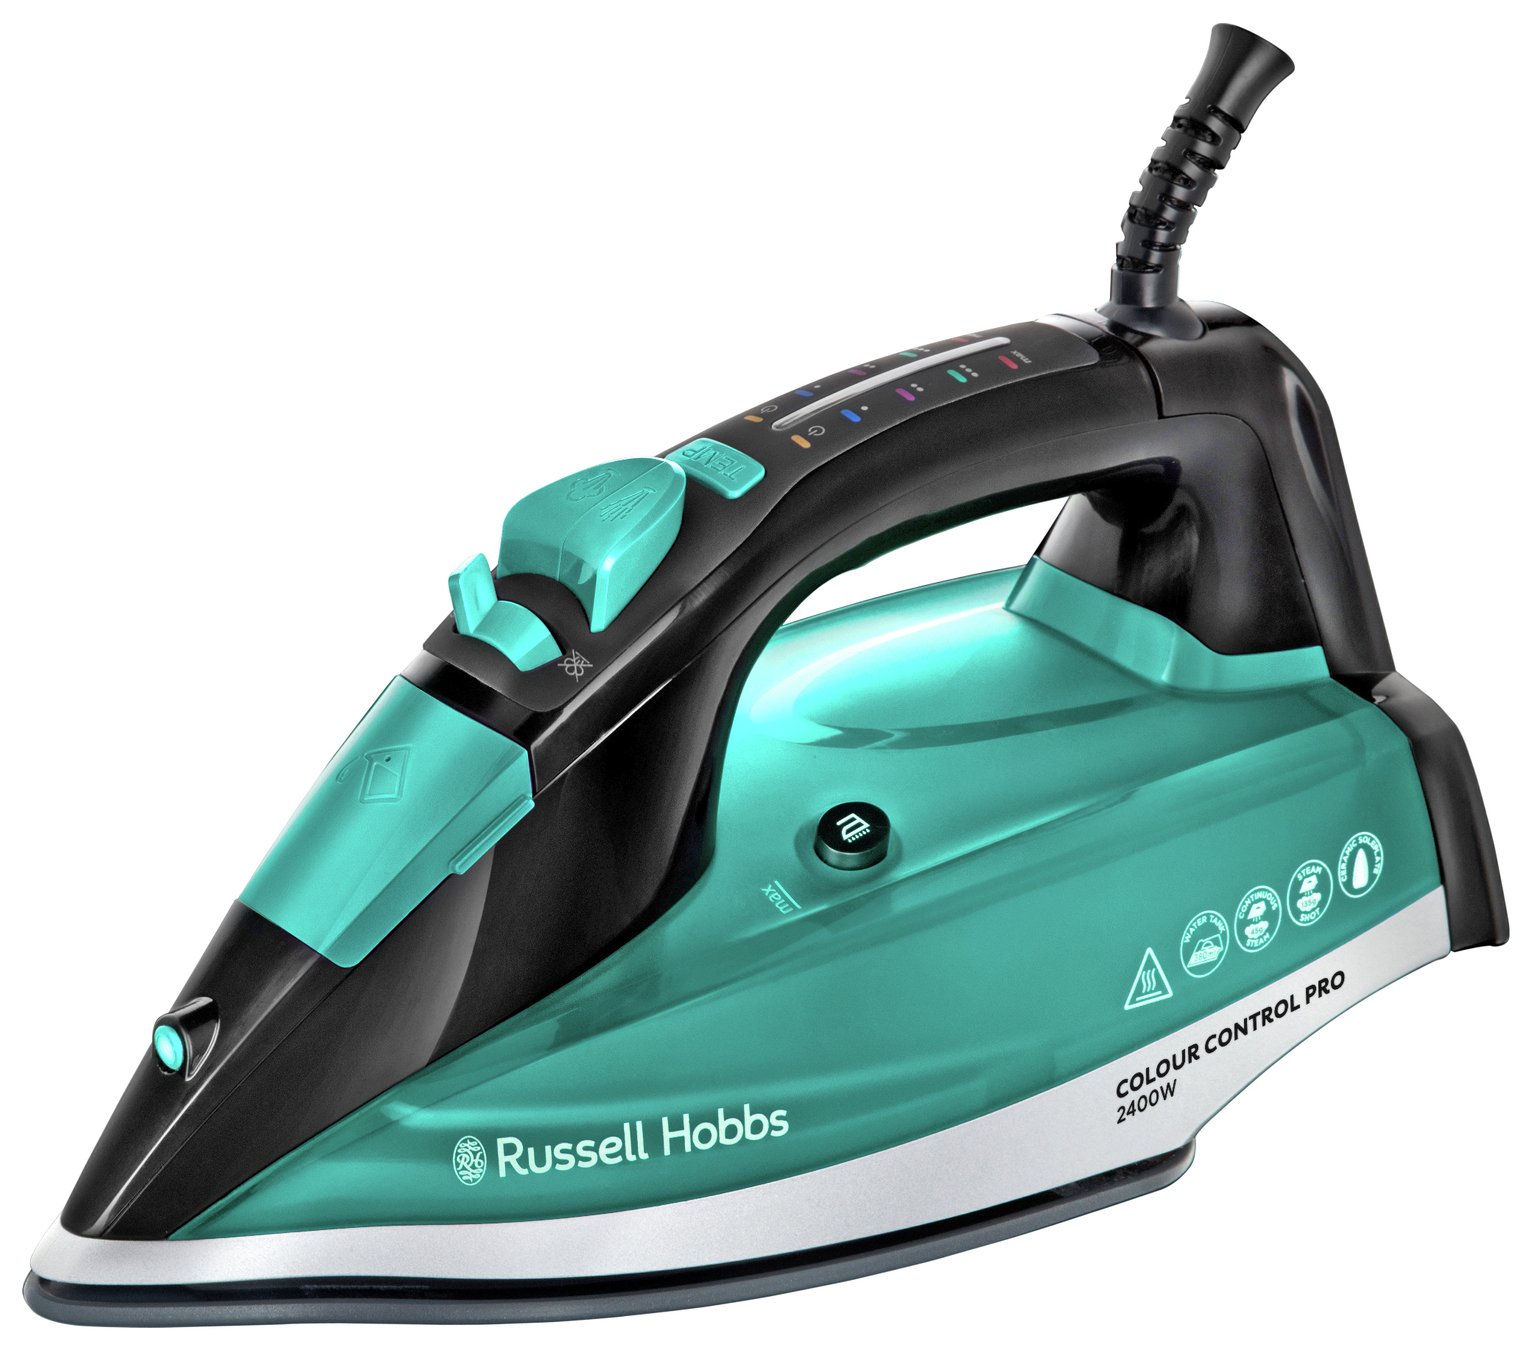 Russell Hobbs 22860 Colour Control Steam Iron Review